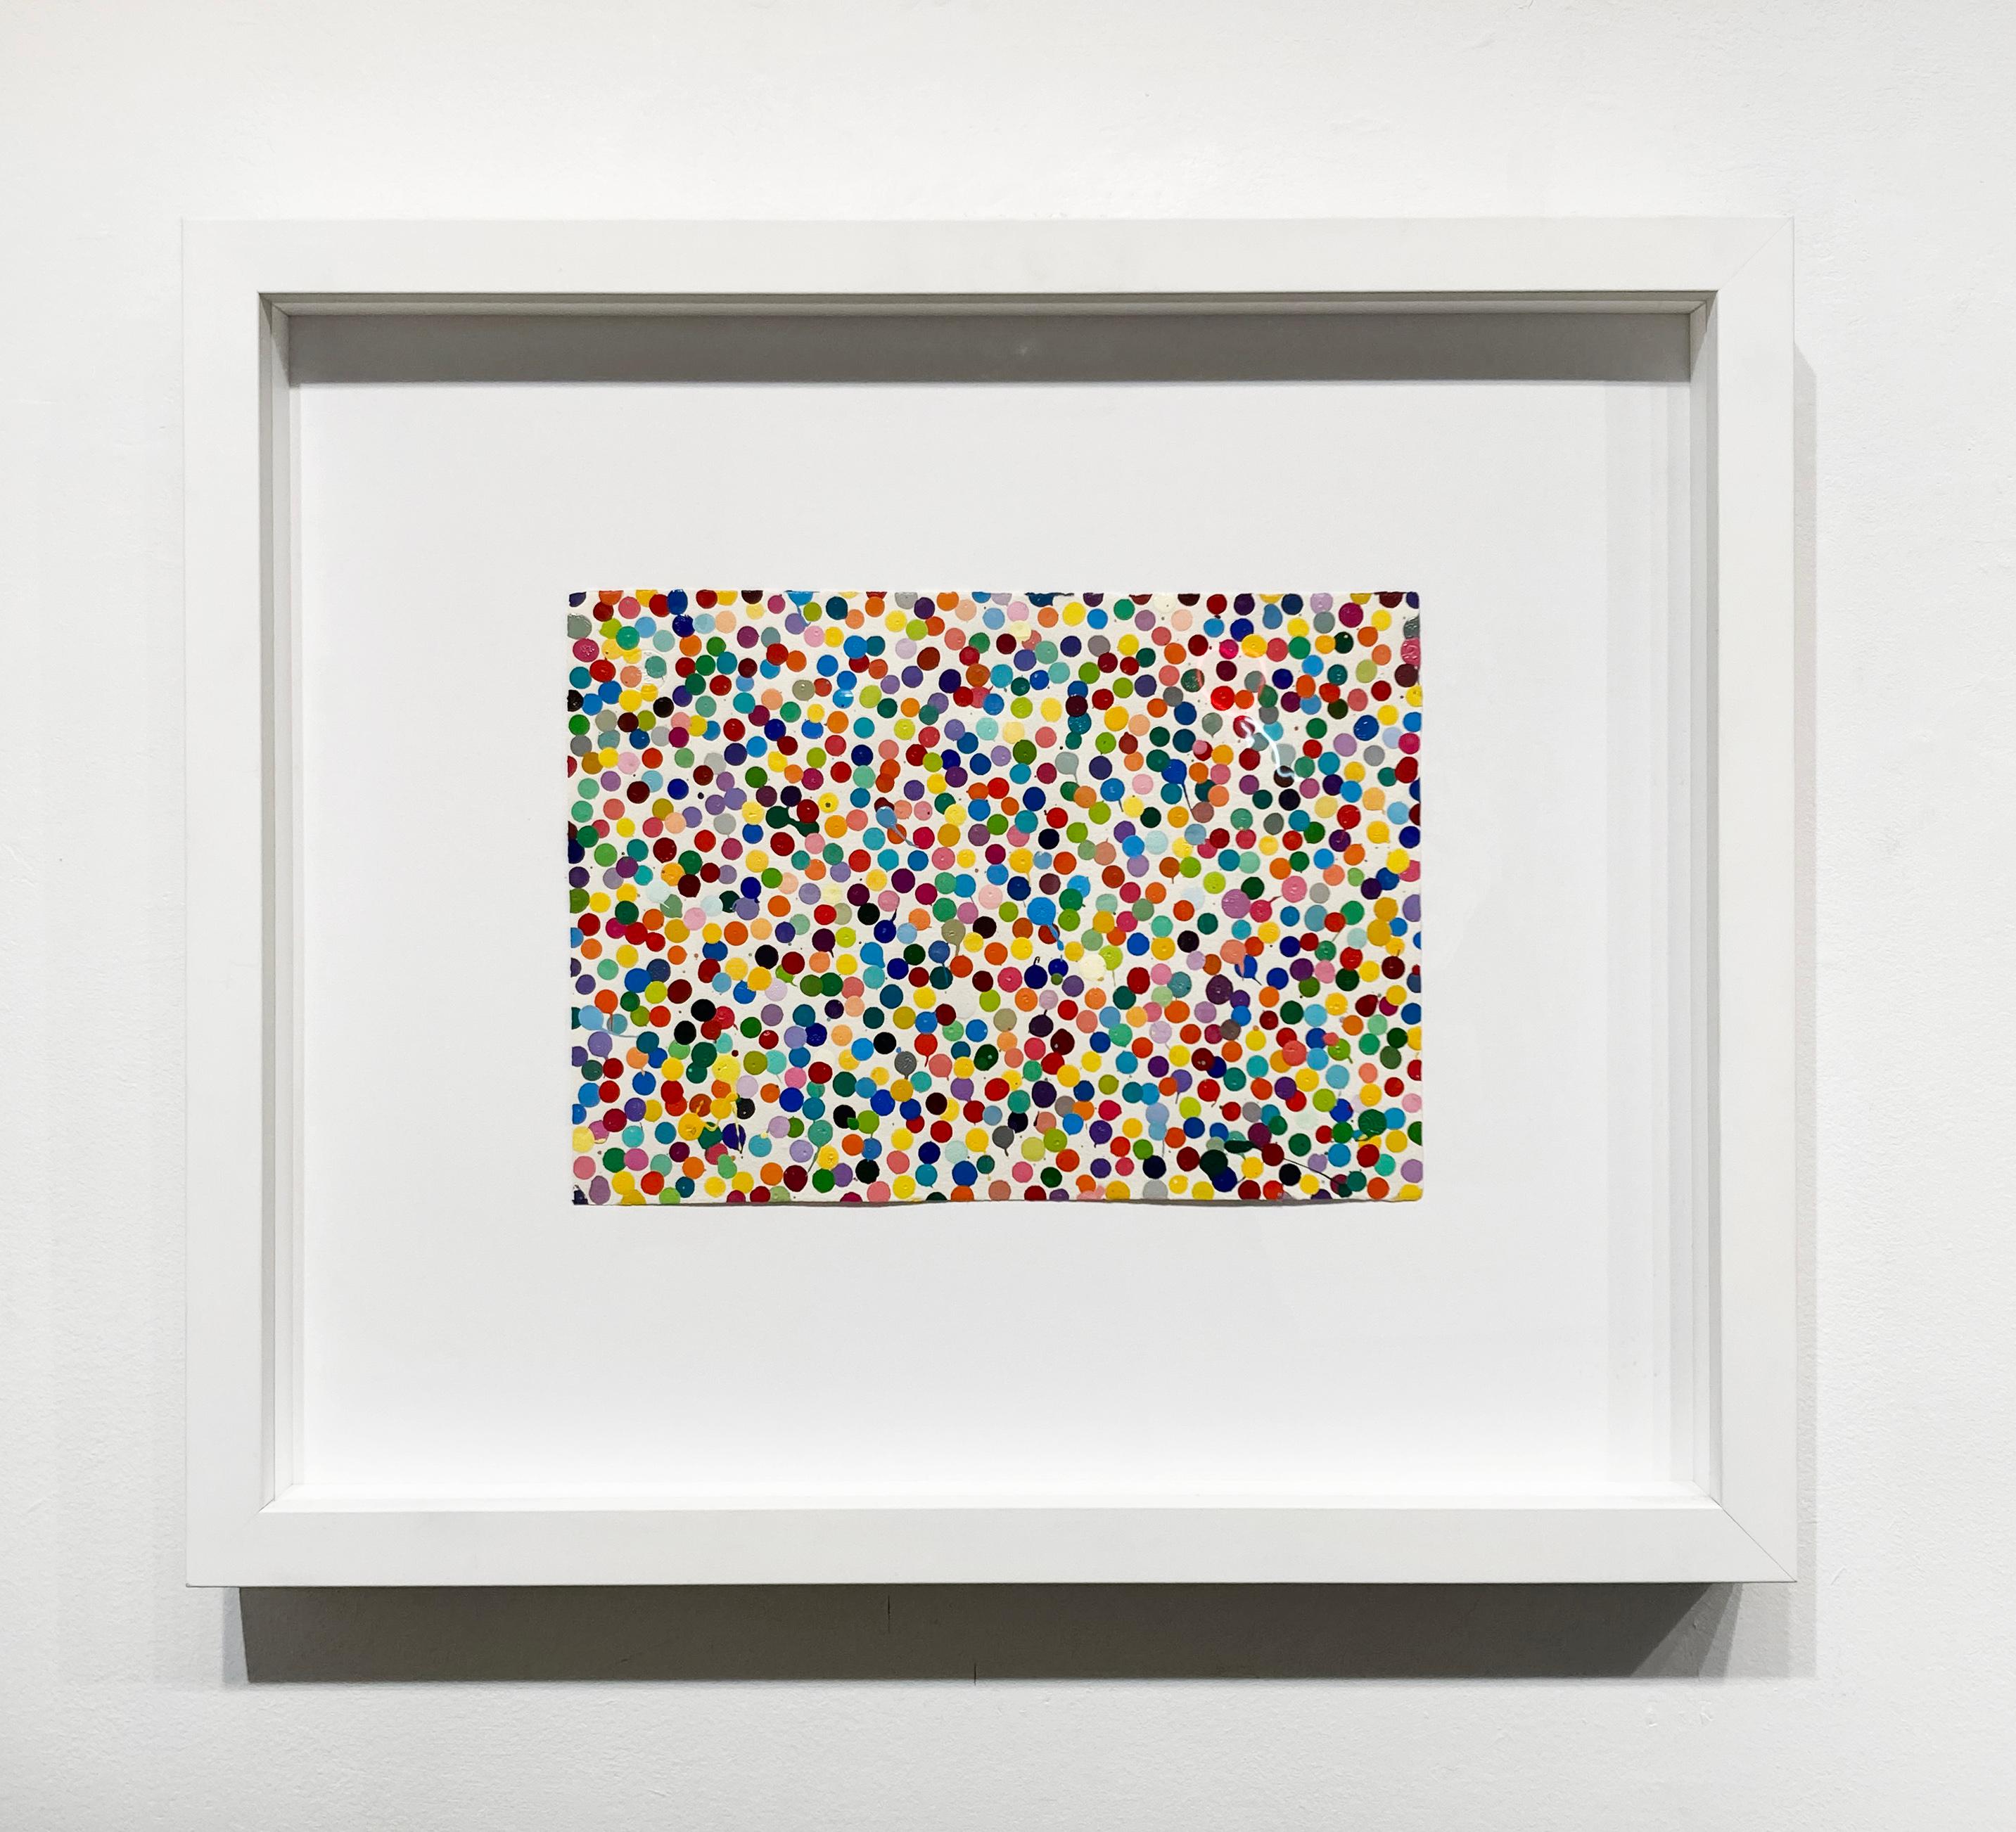 More To Come - Painting by Damien Hirst